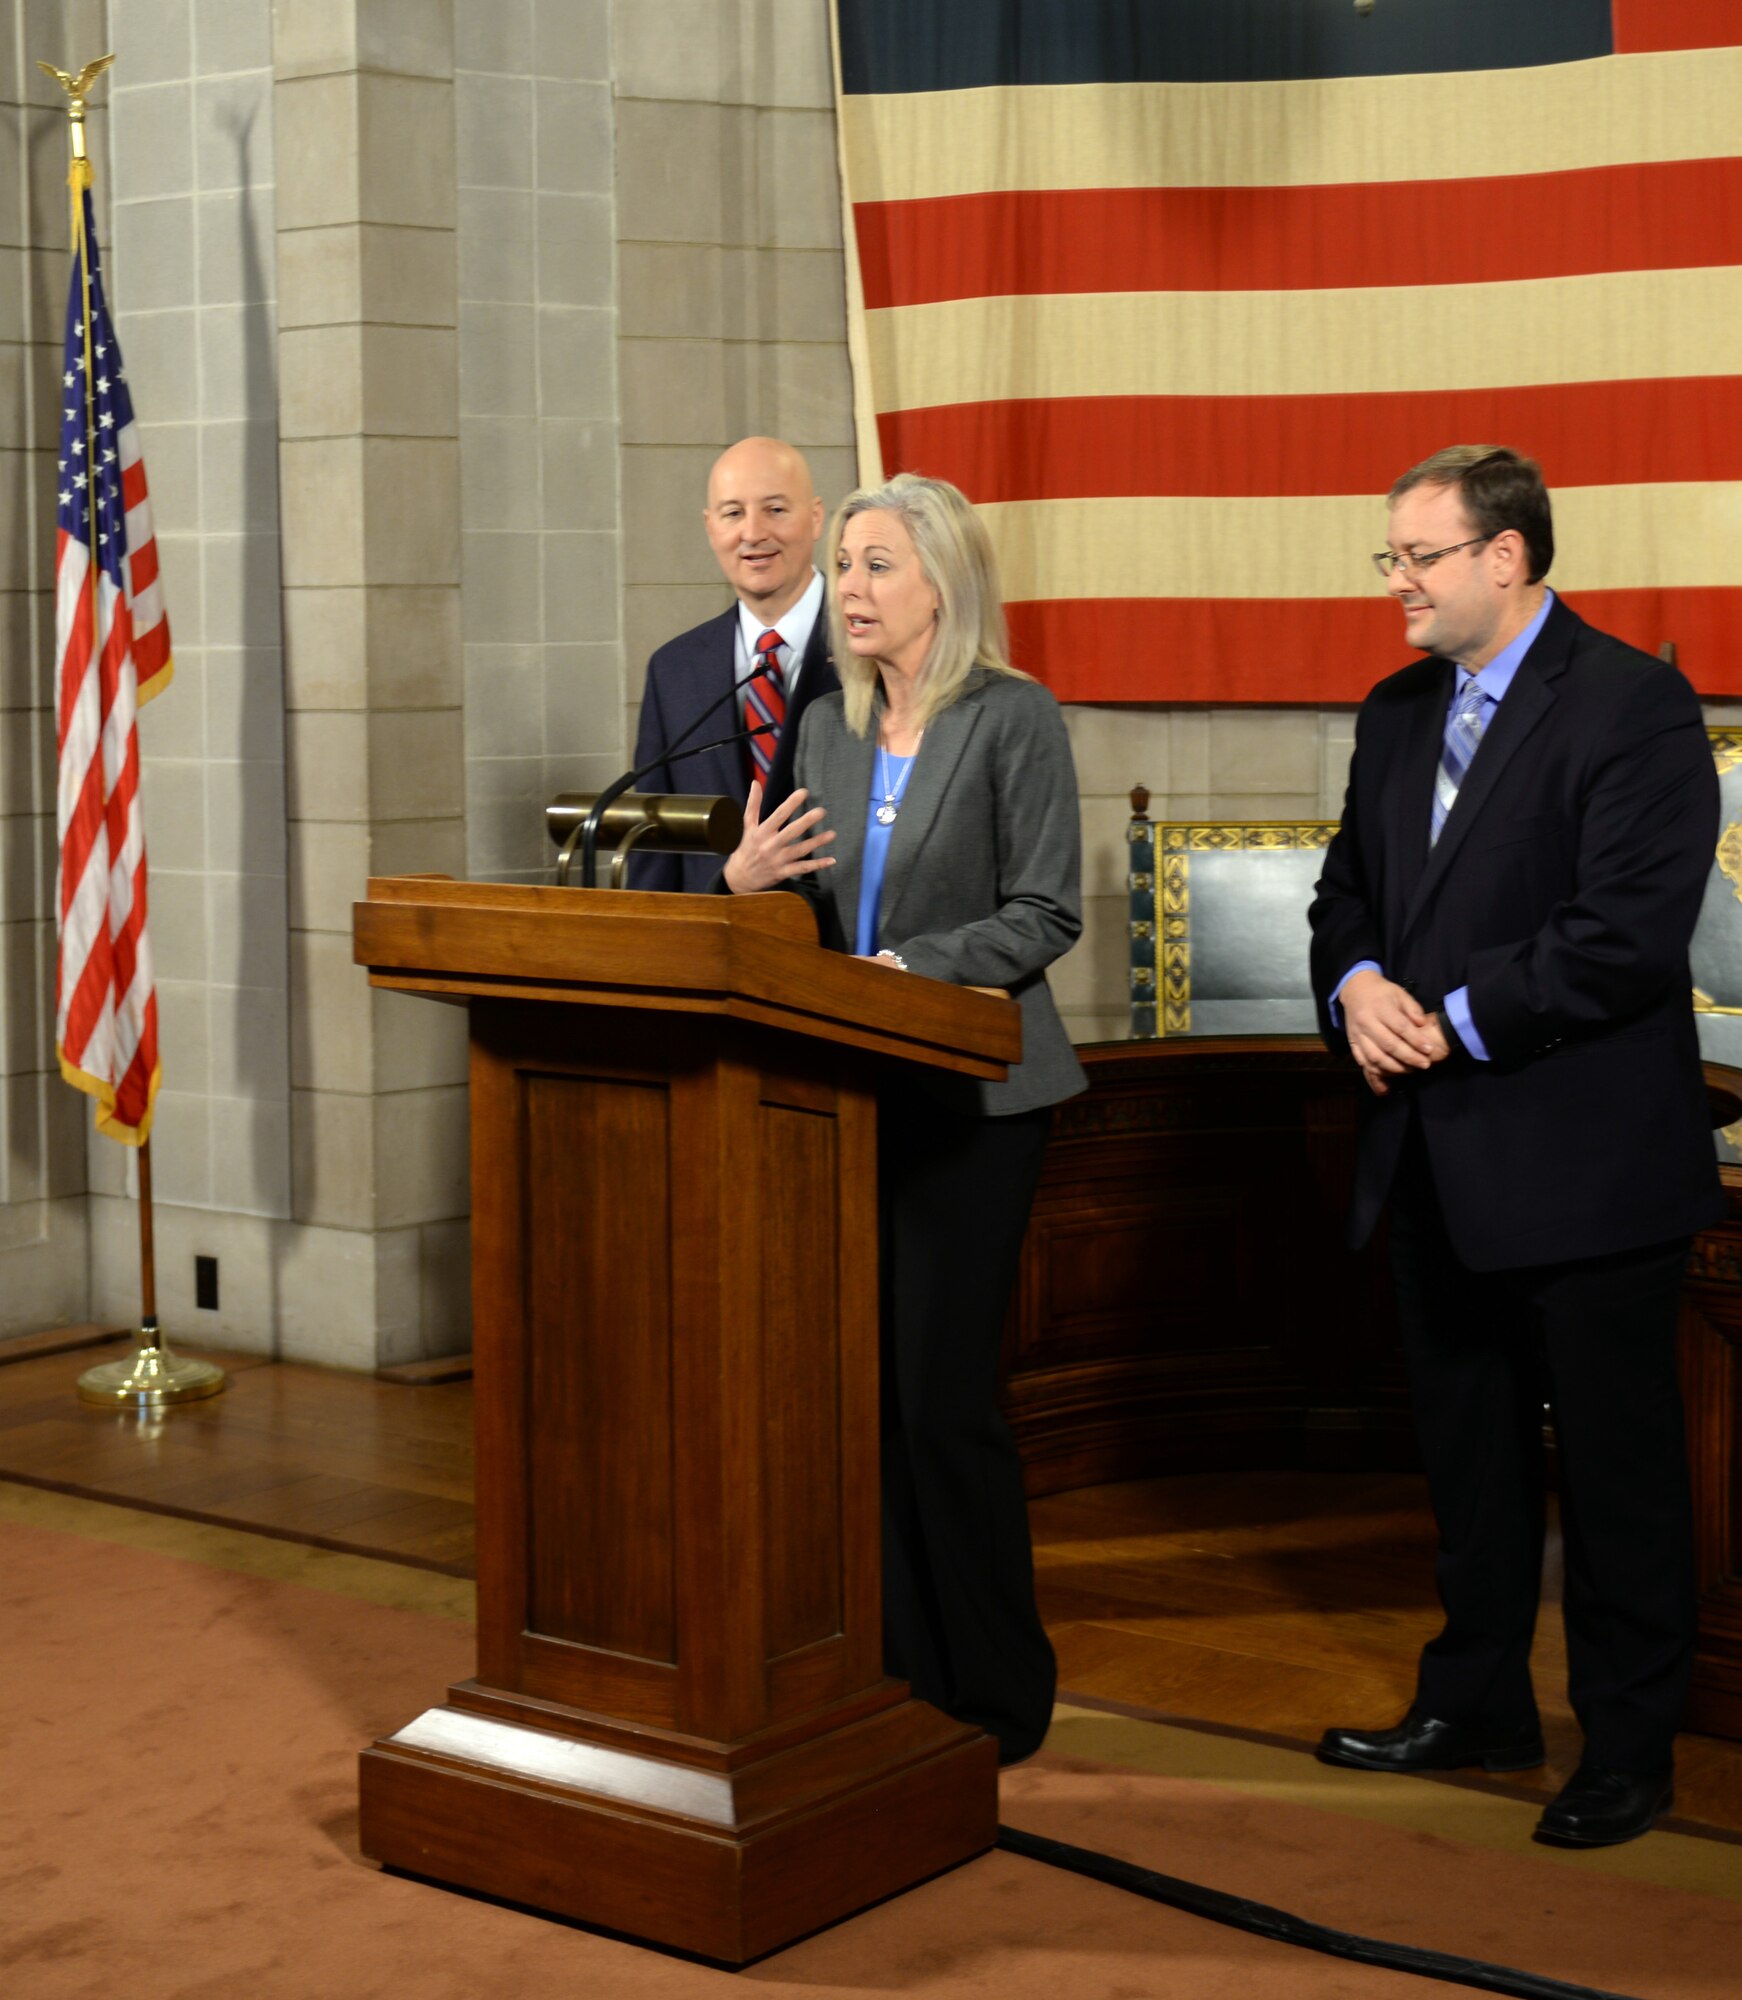 Shannon Manion, a certified teacher and veteran school administrator as well as the spouse of Col. Michael Manion, 55th Wing commander, addresses the media as Nebraska Gov. Pete Ricketts and Matt Blomstedt, commissioner of the Nebraska Department of Education, look on at the Nebraska State Capitol in Lincoln, Nebraska on March 19, 2018. According to the governor, manion was instrumental in changing Rule 21 which regulates state teaching licenses and will make it easier for military spouses to teach immediately if they have recently arrived from out of state.